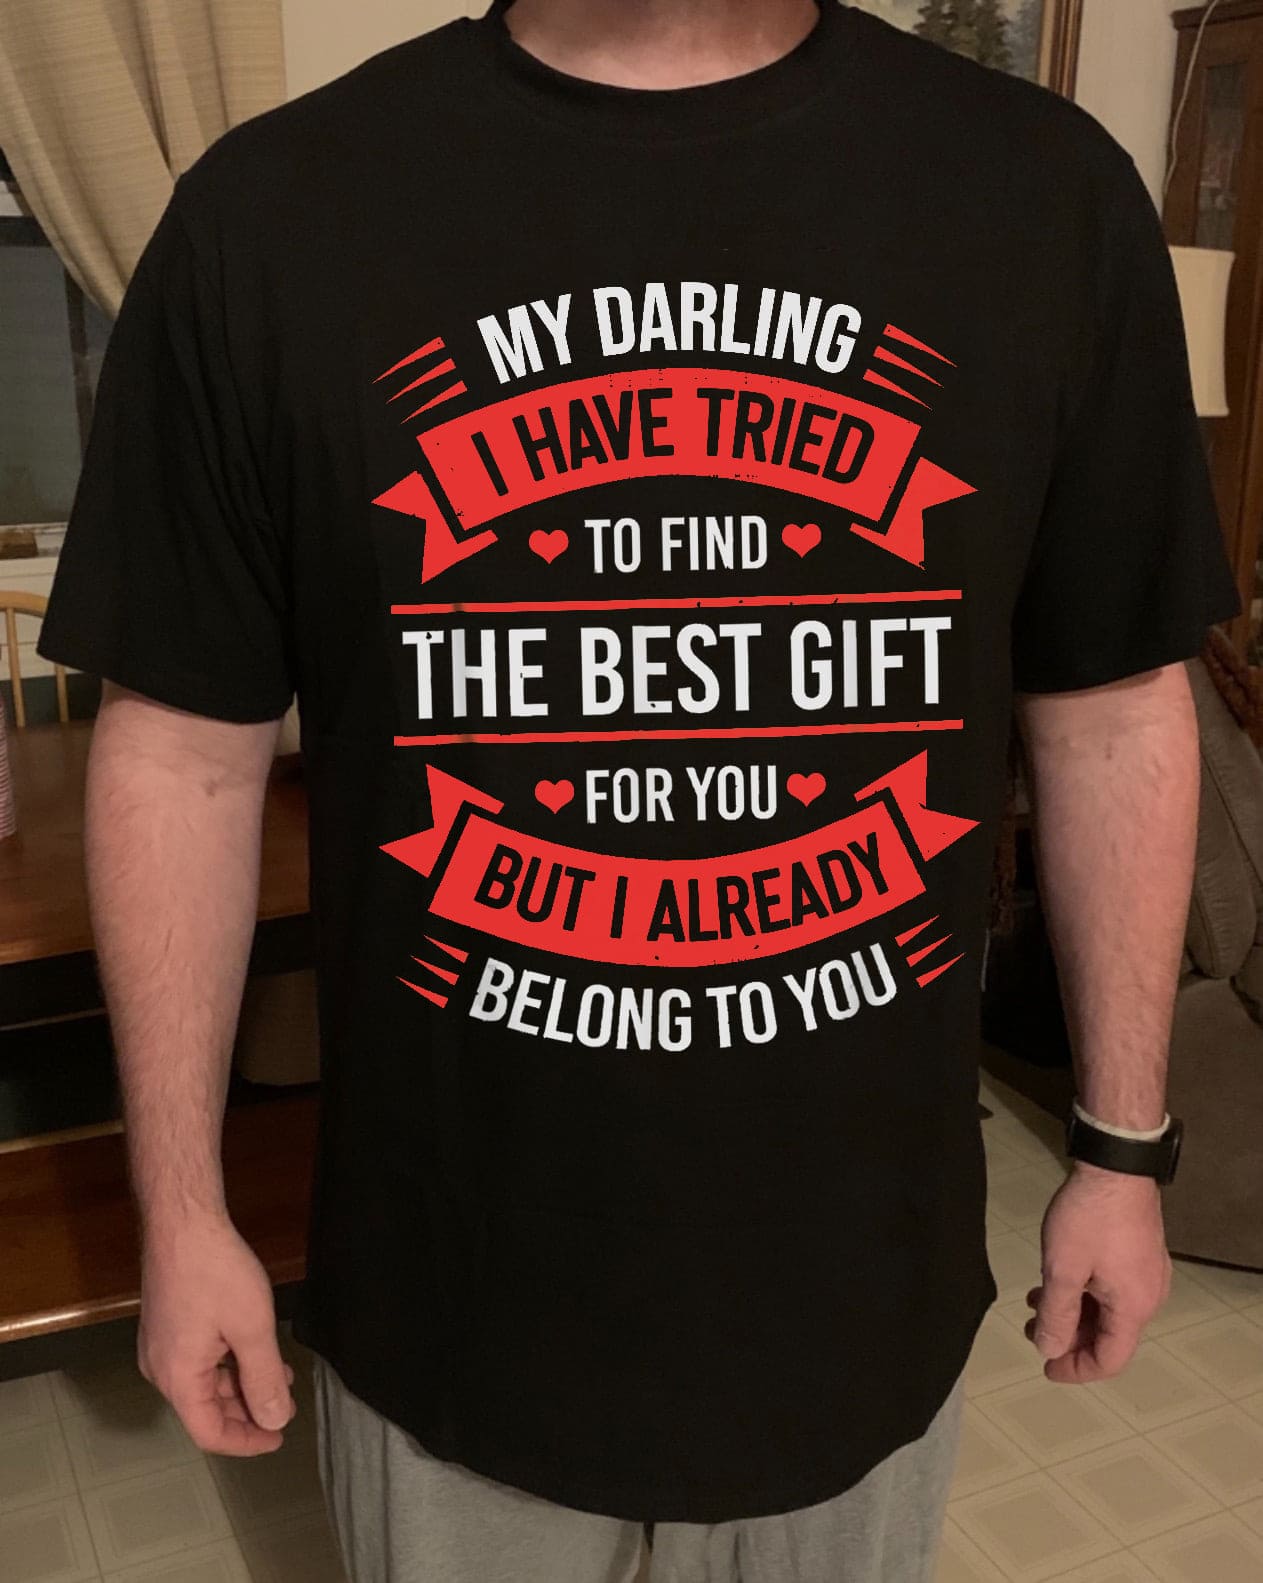 My darling I have tried to find the best gift for you but I already belong to you - Funny Valentine T-shirt